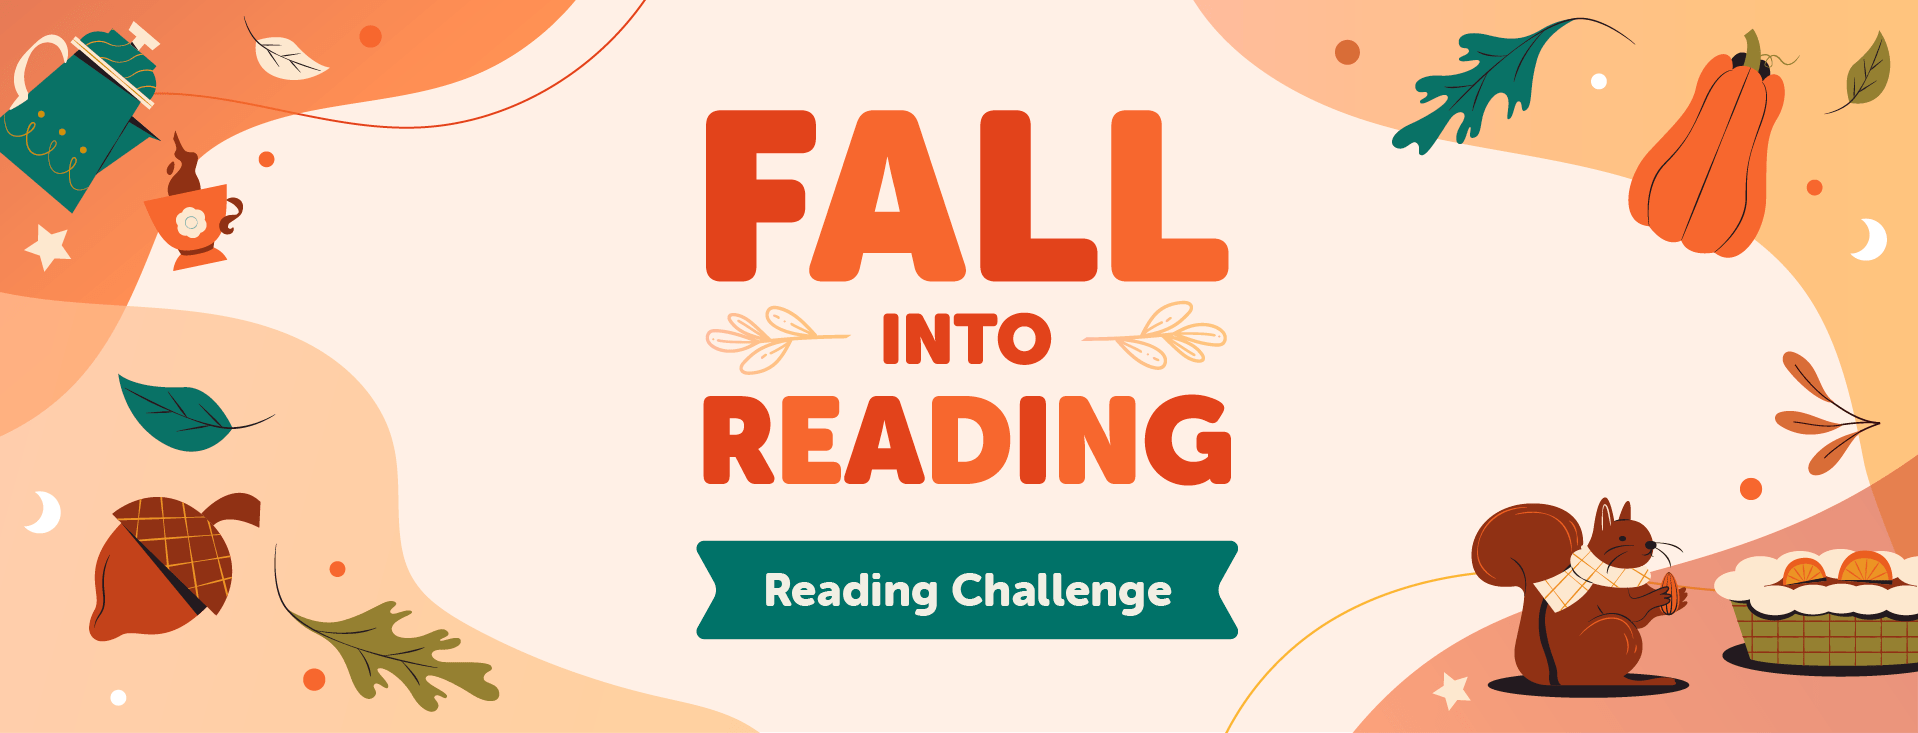 Fall into Reading: Reading Challenge